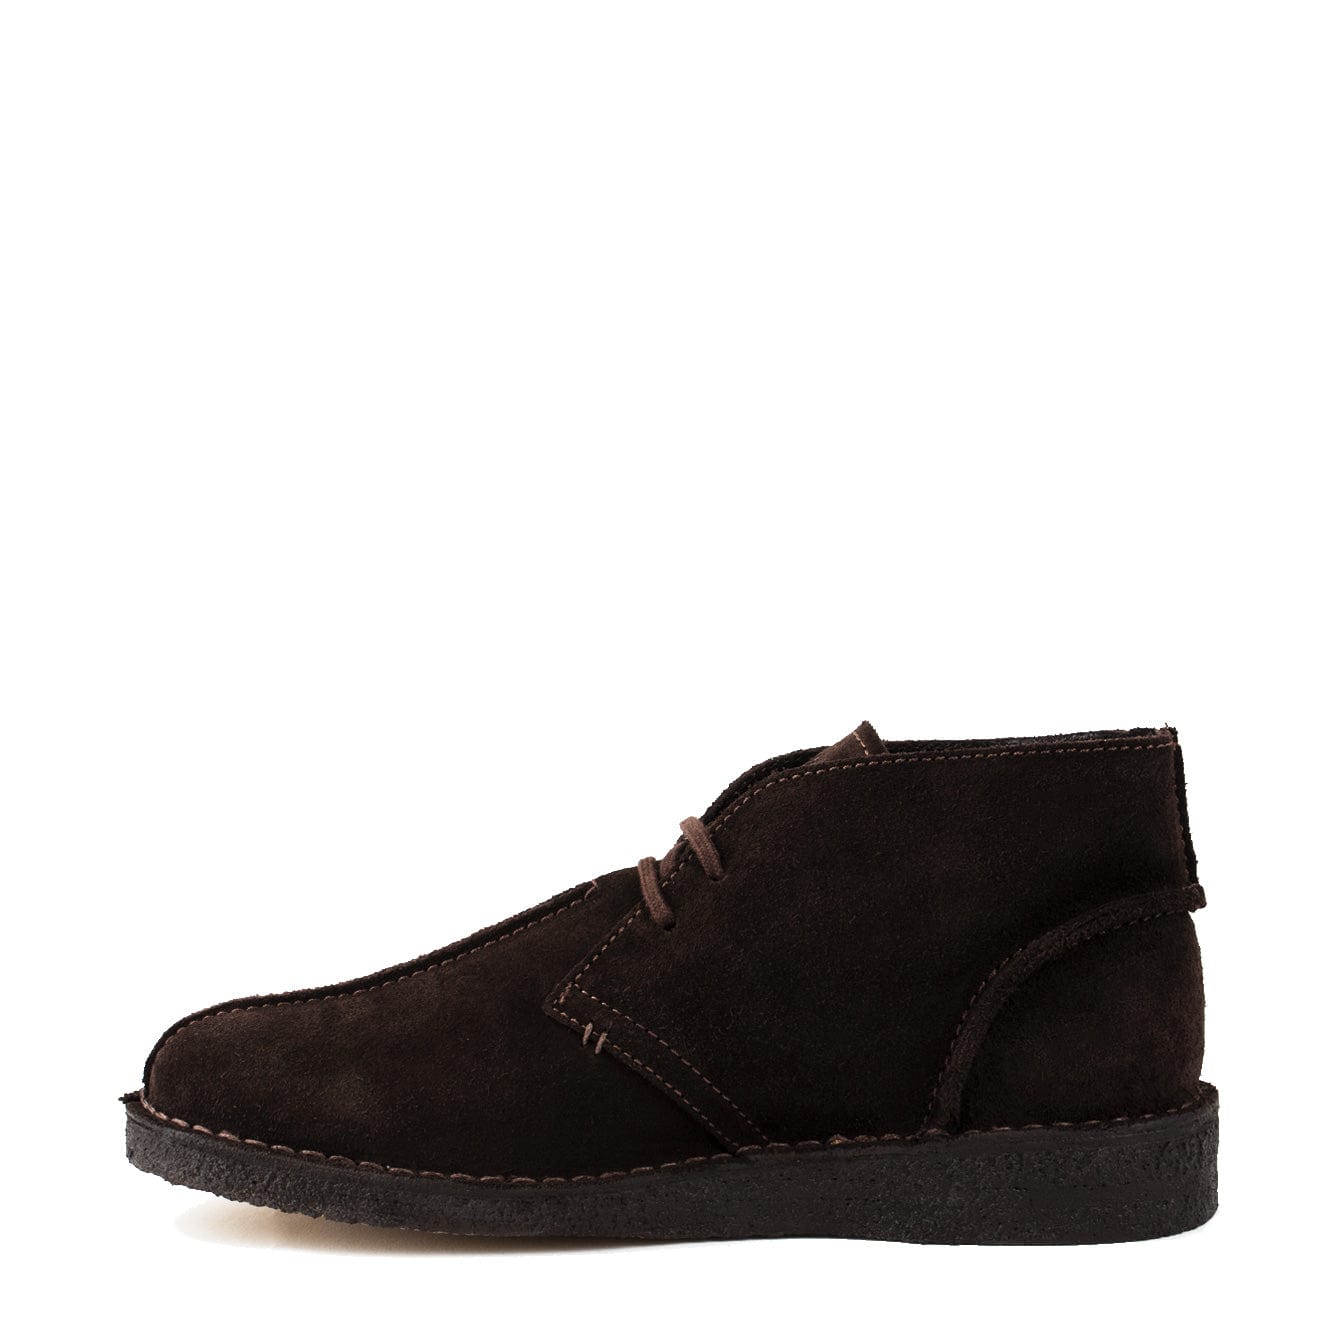 Oswen Agnes Suede Boots Espresso | The Sporting Lodge